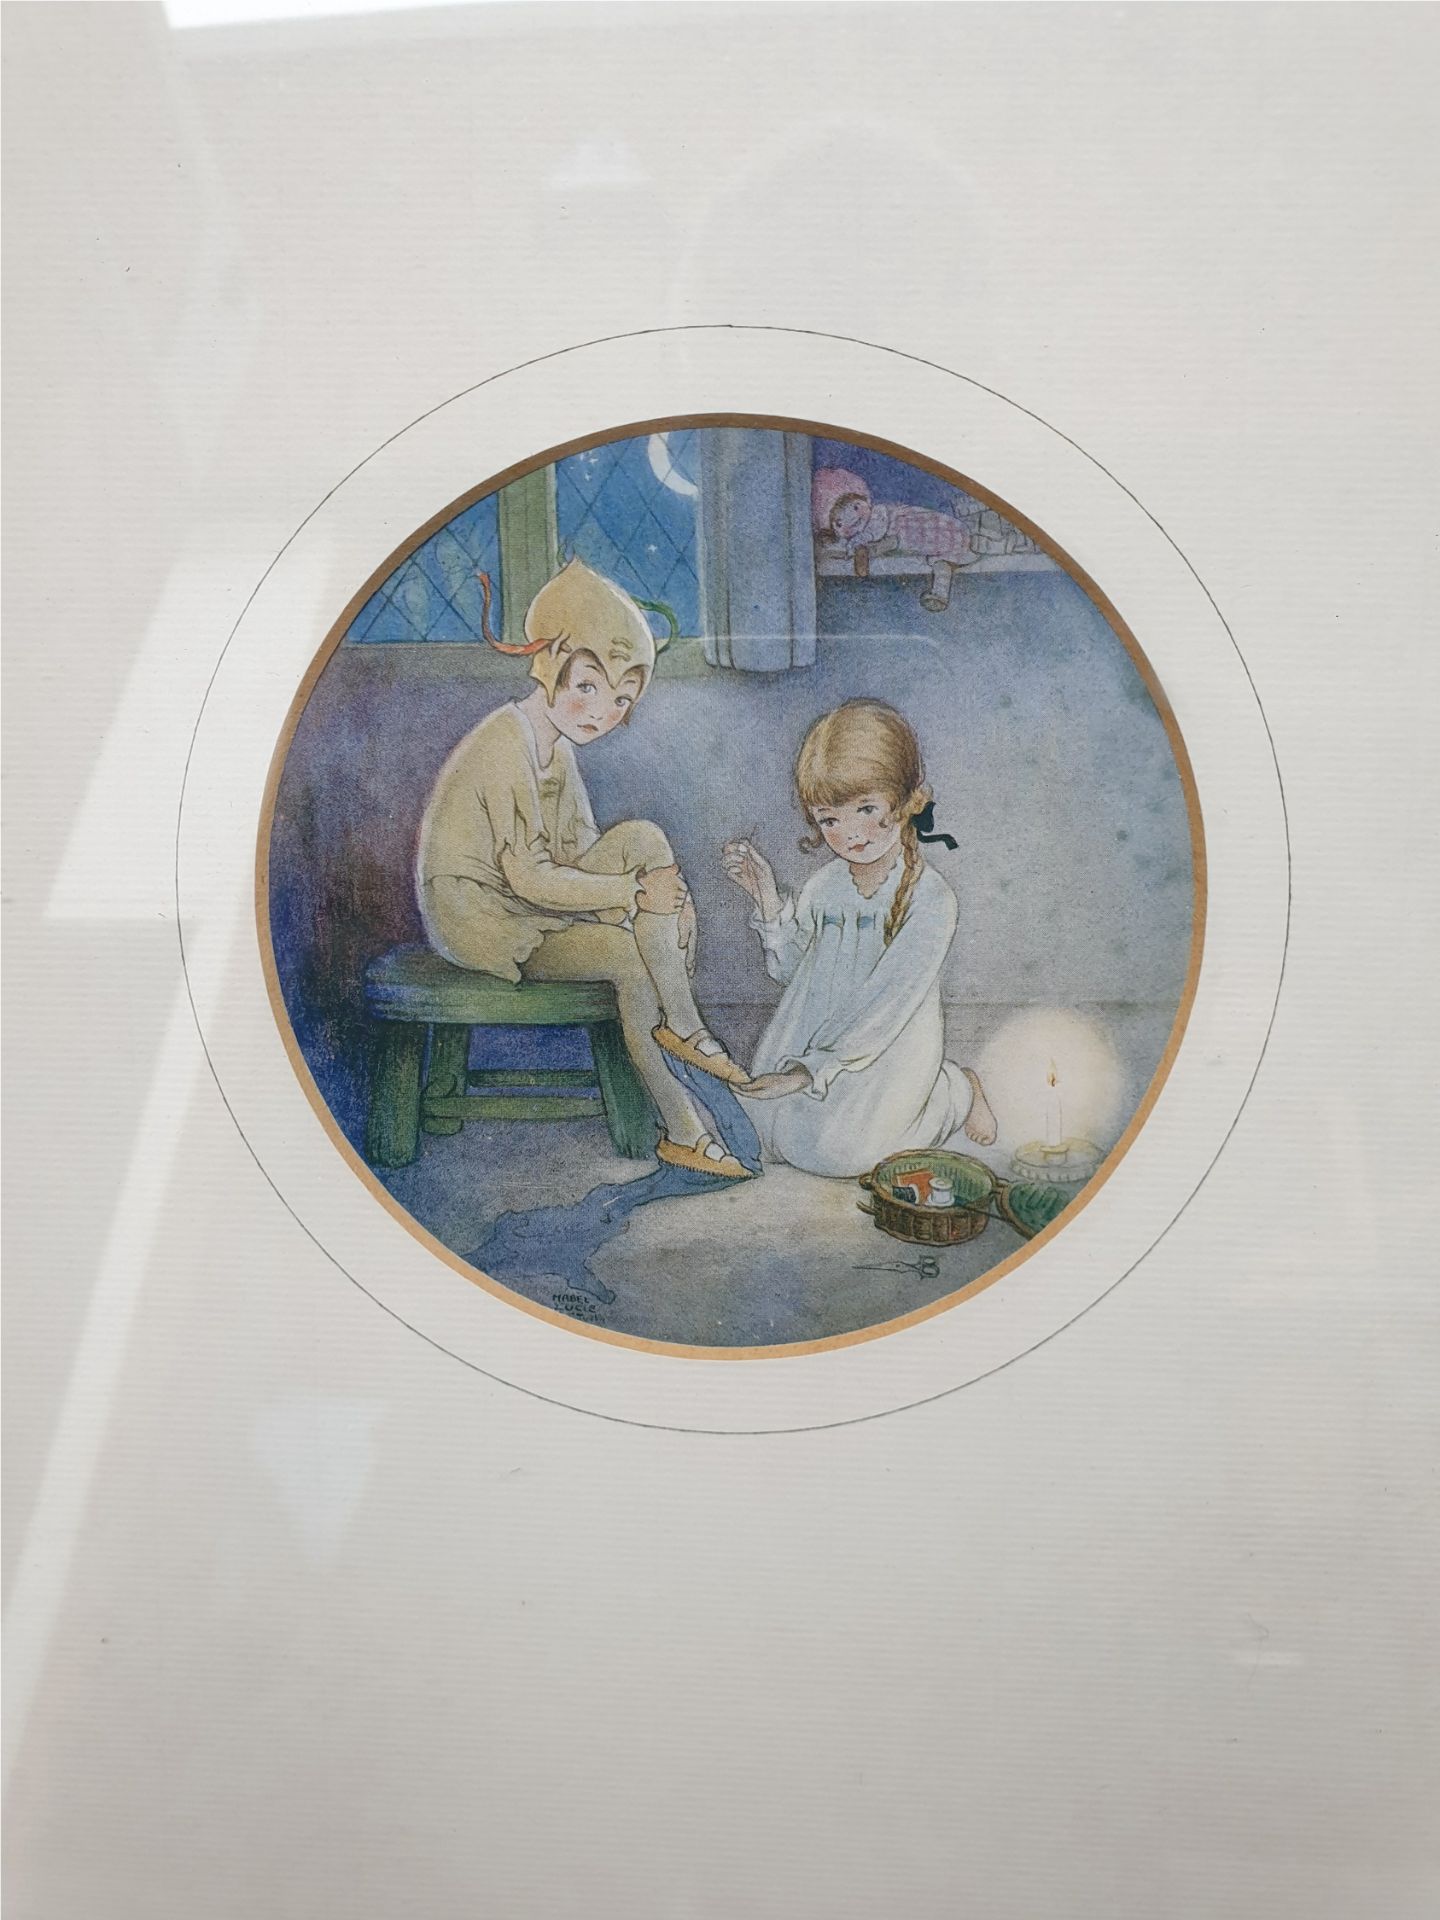 Art Framed Vignette Picture Peter Pan and Wendy - Image 2 of 2